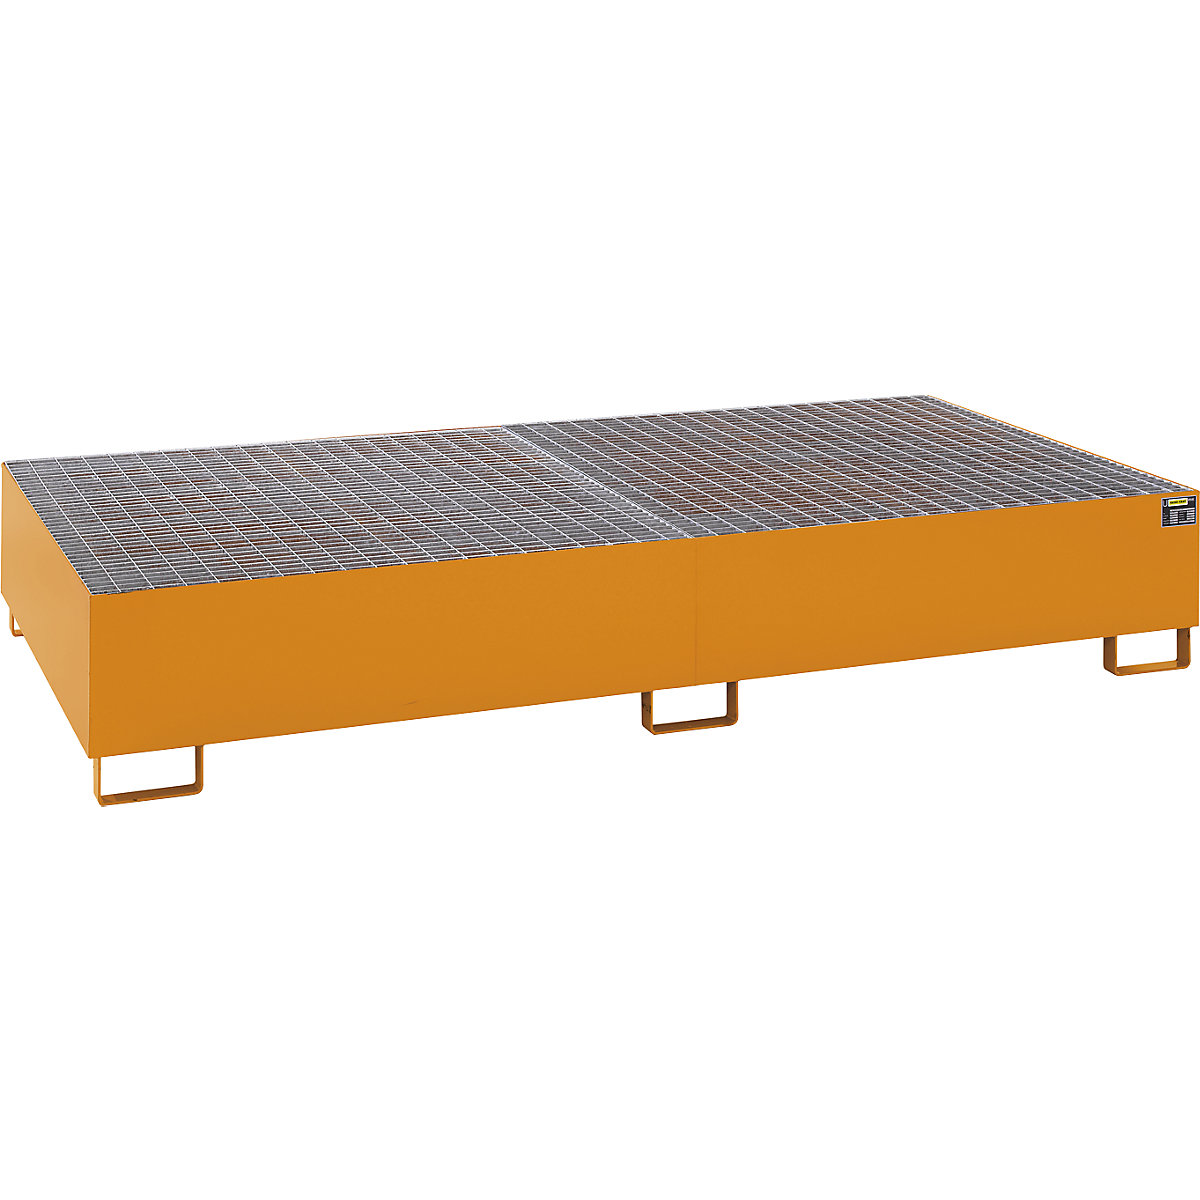 Steel sump tray for IBC/CTC tank containers - eurokraft pro